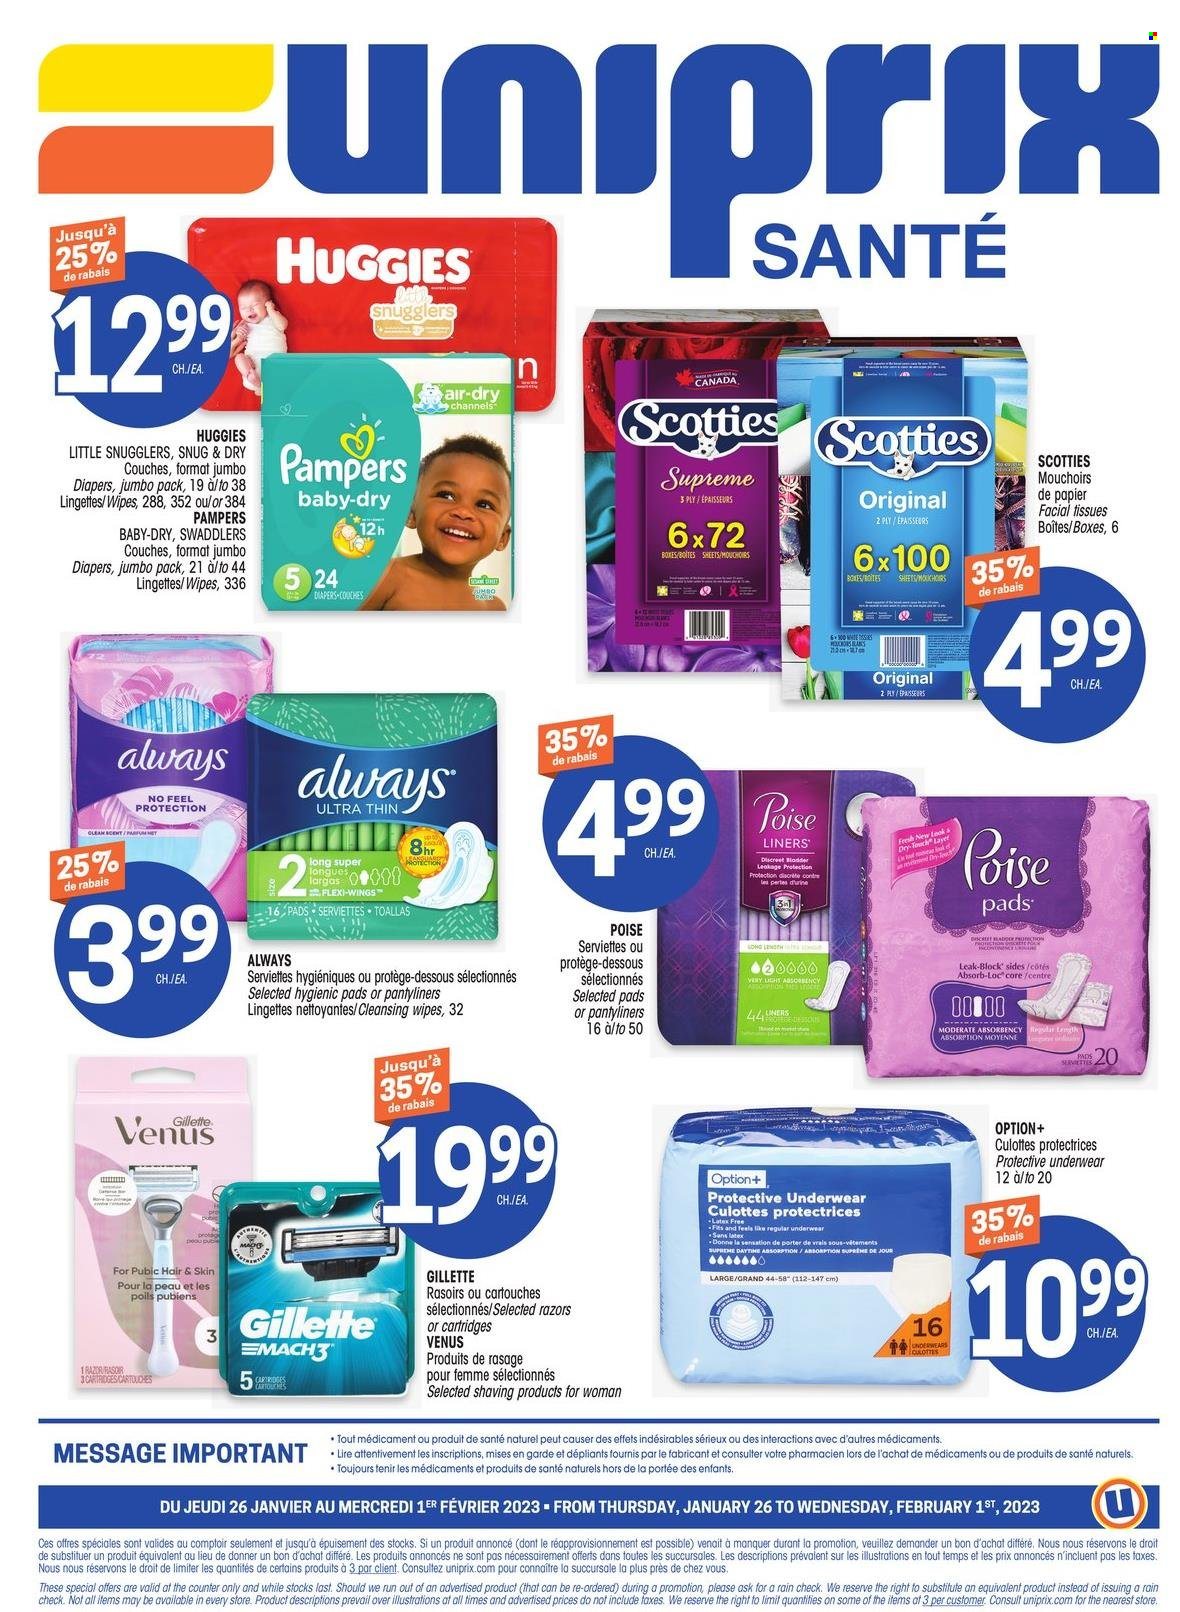 thumbnail - Uniprix Santé Flyer - January 26, 2023 - February 01, 2023 - Sales products - cleansing wipes, wipes, Pampers, nappies, tissues, Always pads, pantyliners, facial tissues, Gillette, razor, Venus, Huggies. Page 4.